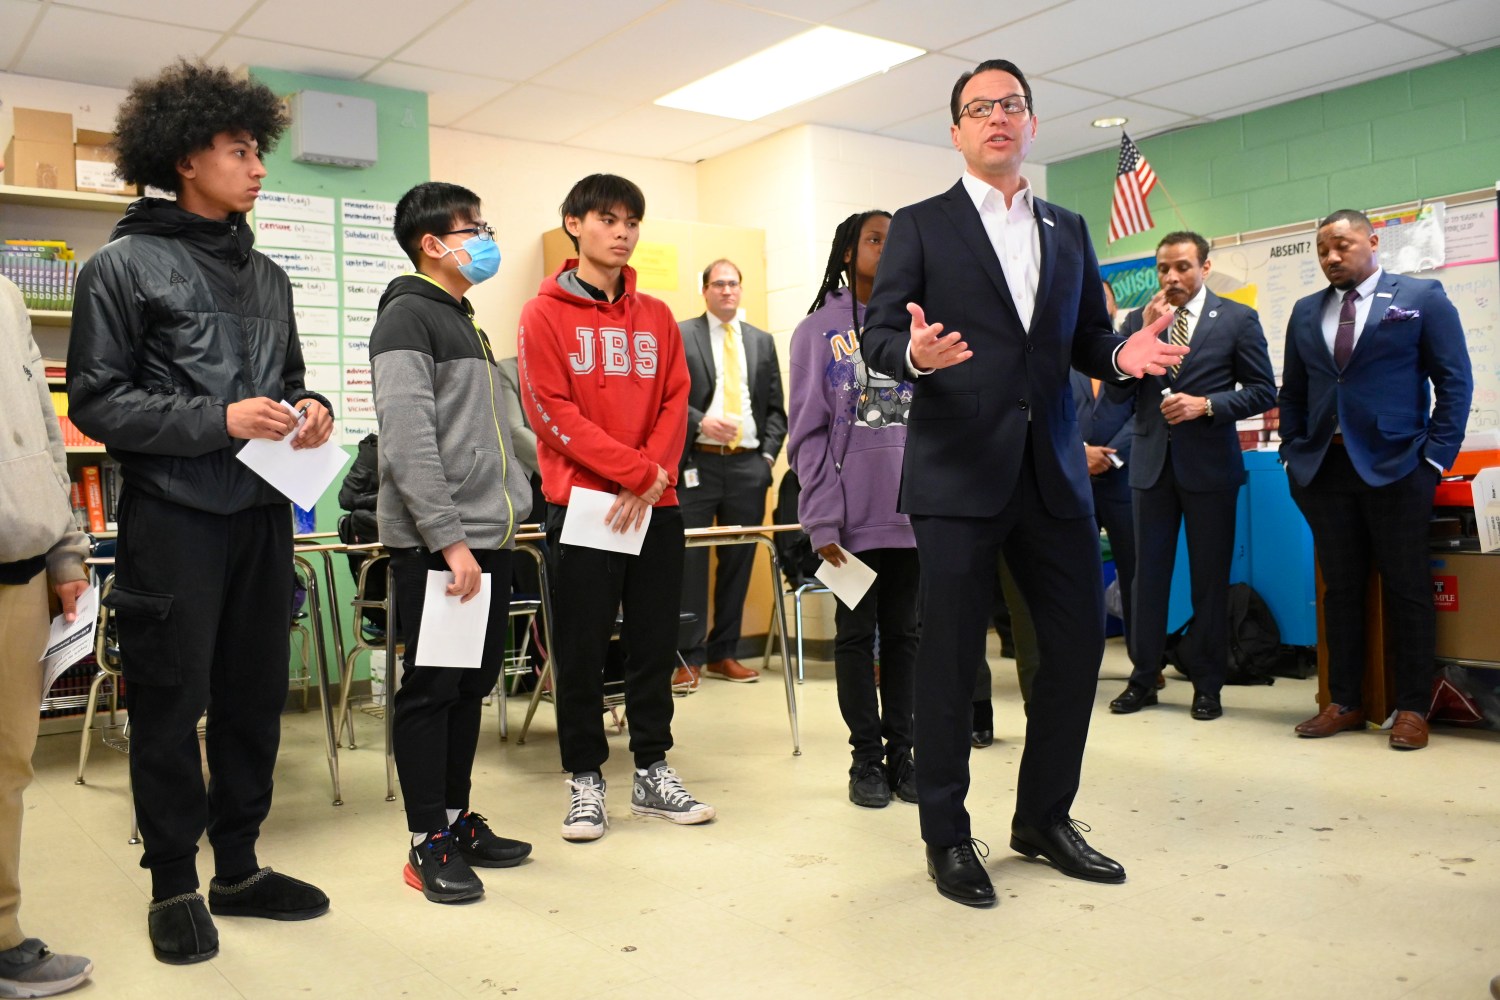 Pennsylvania Governor Josh Shapiro speaks to students in a classroom during a visit to G.W. Carver High School of Engineering and Science in North Philadelphia, PA, USA on March 15, 2023.